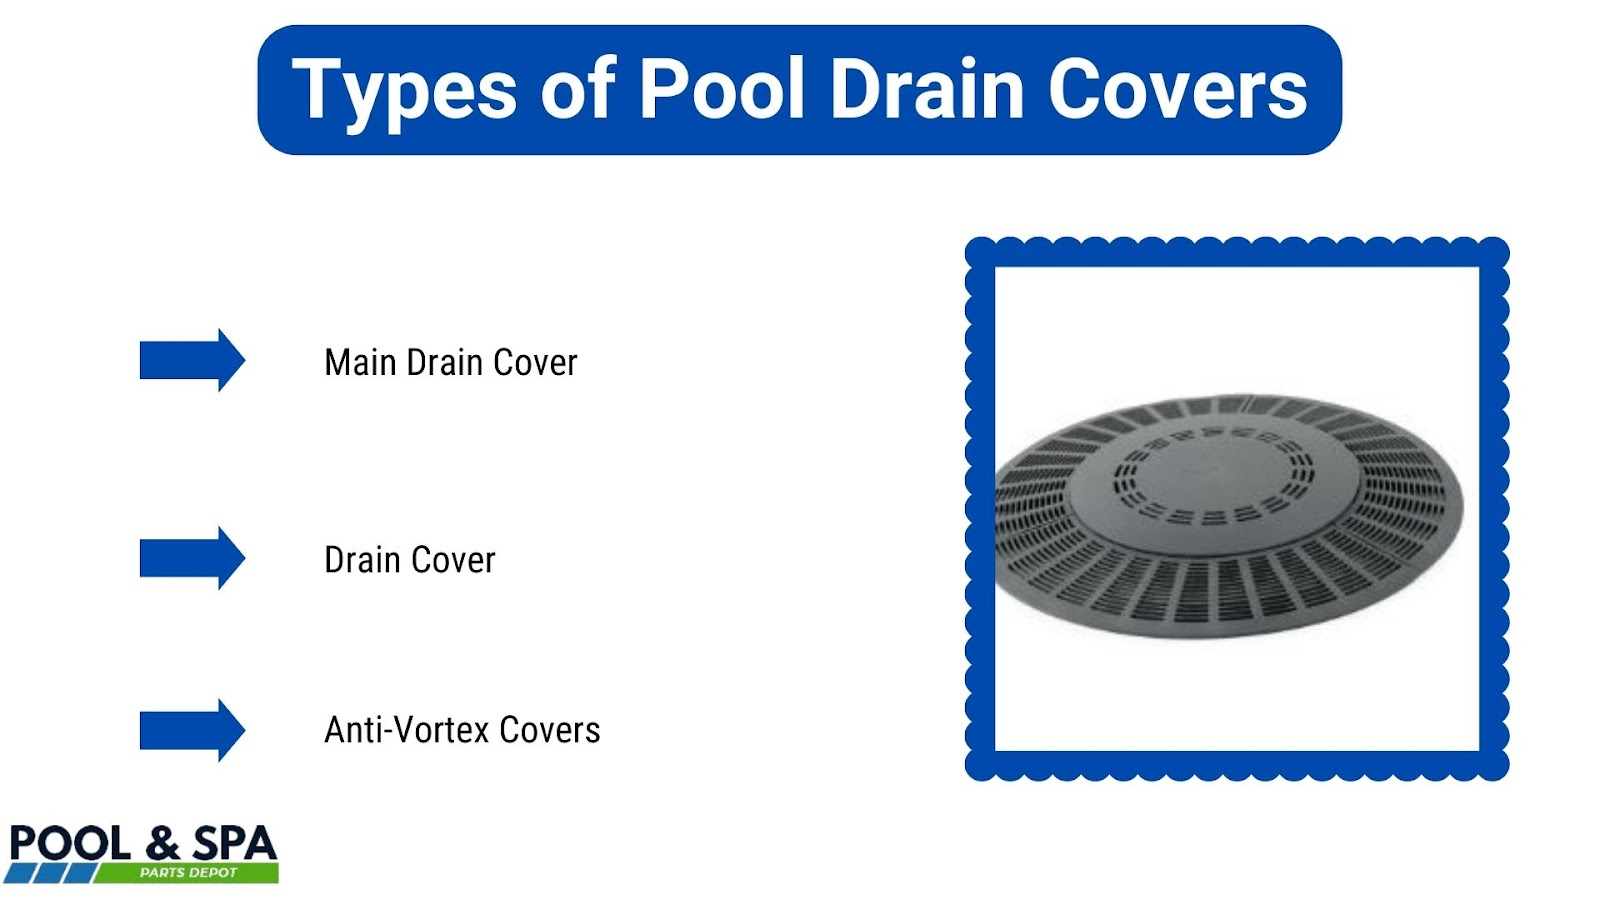 Types of Pool Drain Covers